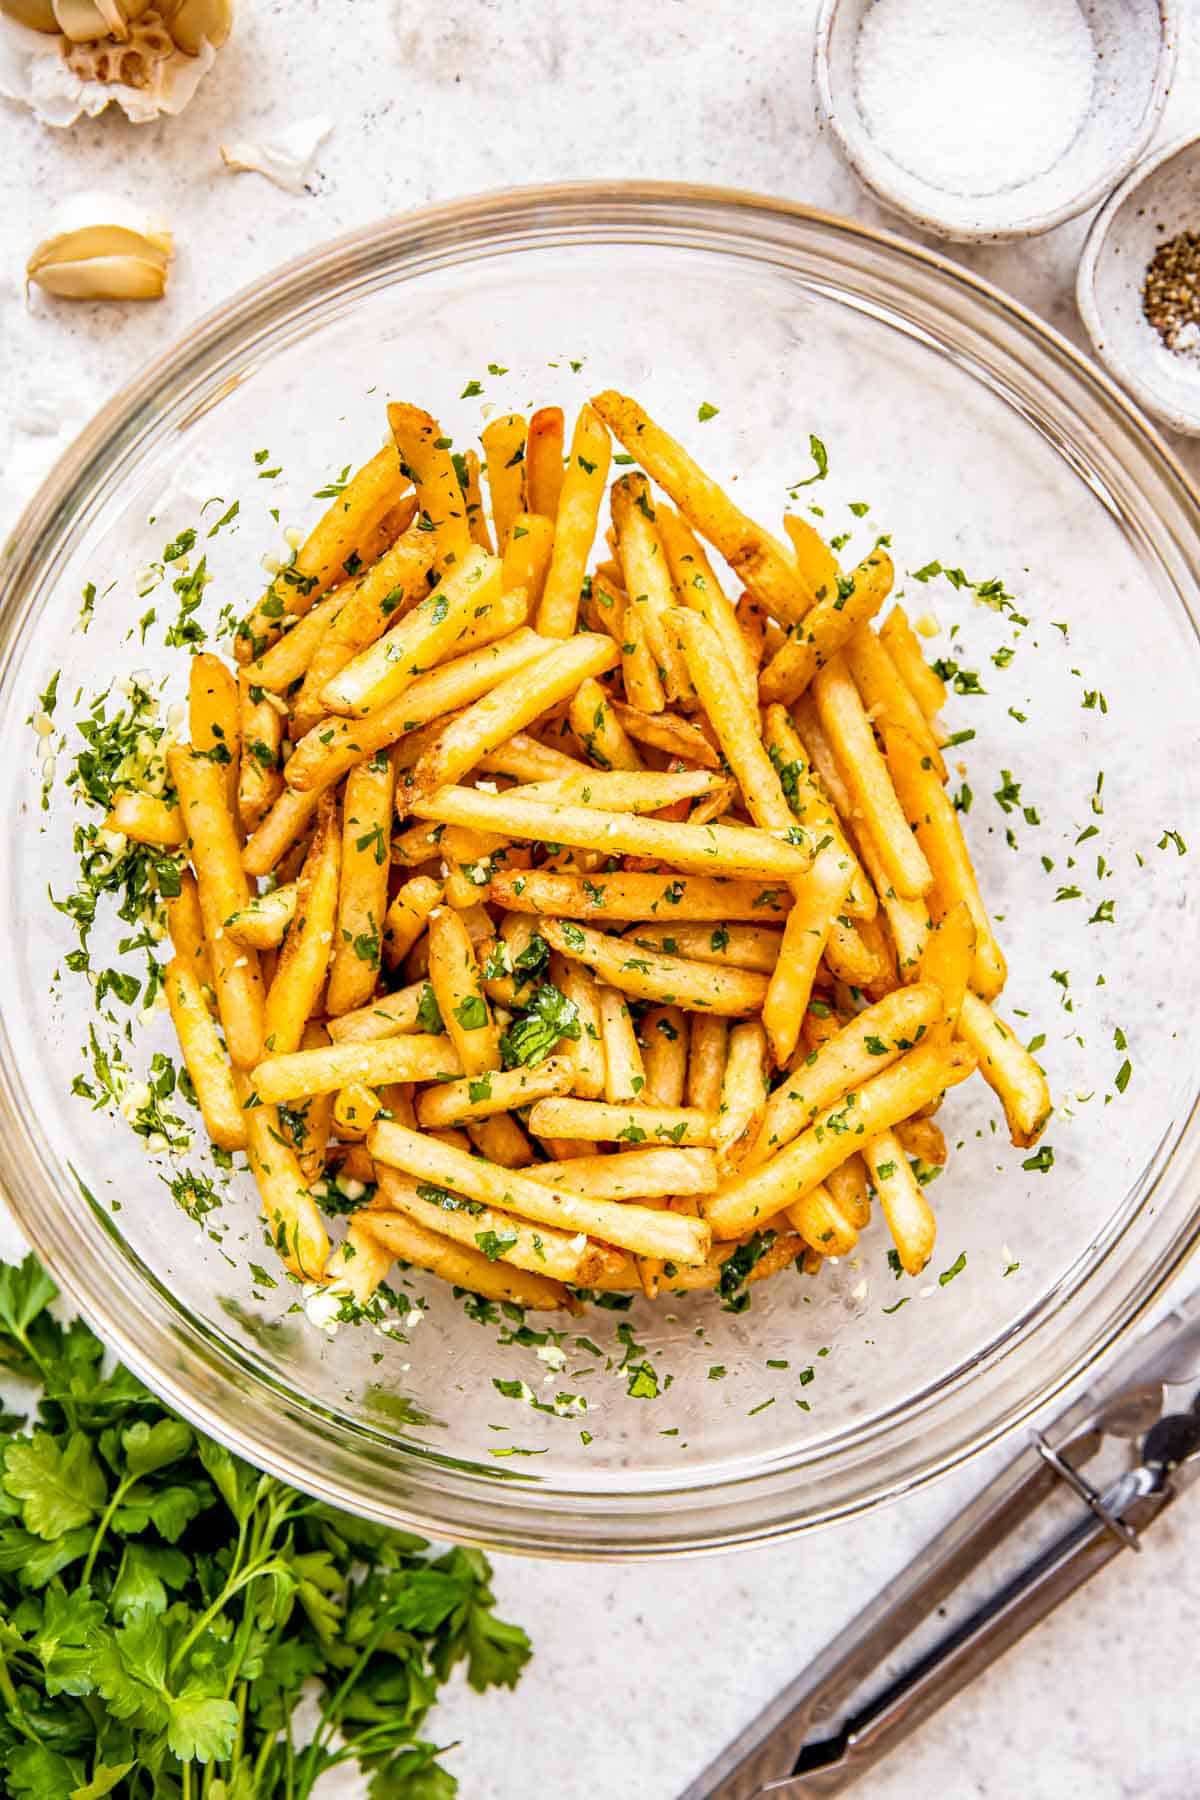 Cooked fries are tossed in a bowl with parsley and garlic. 